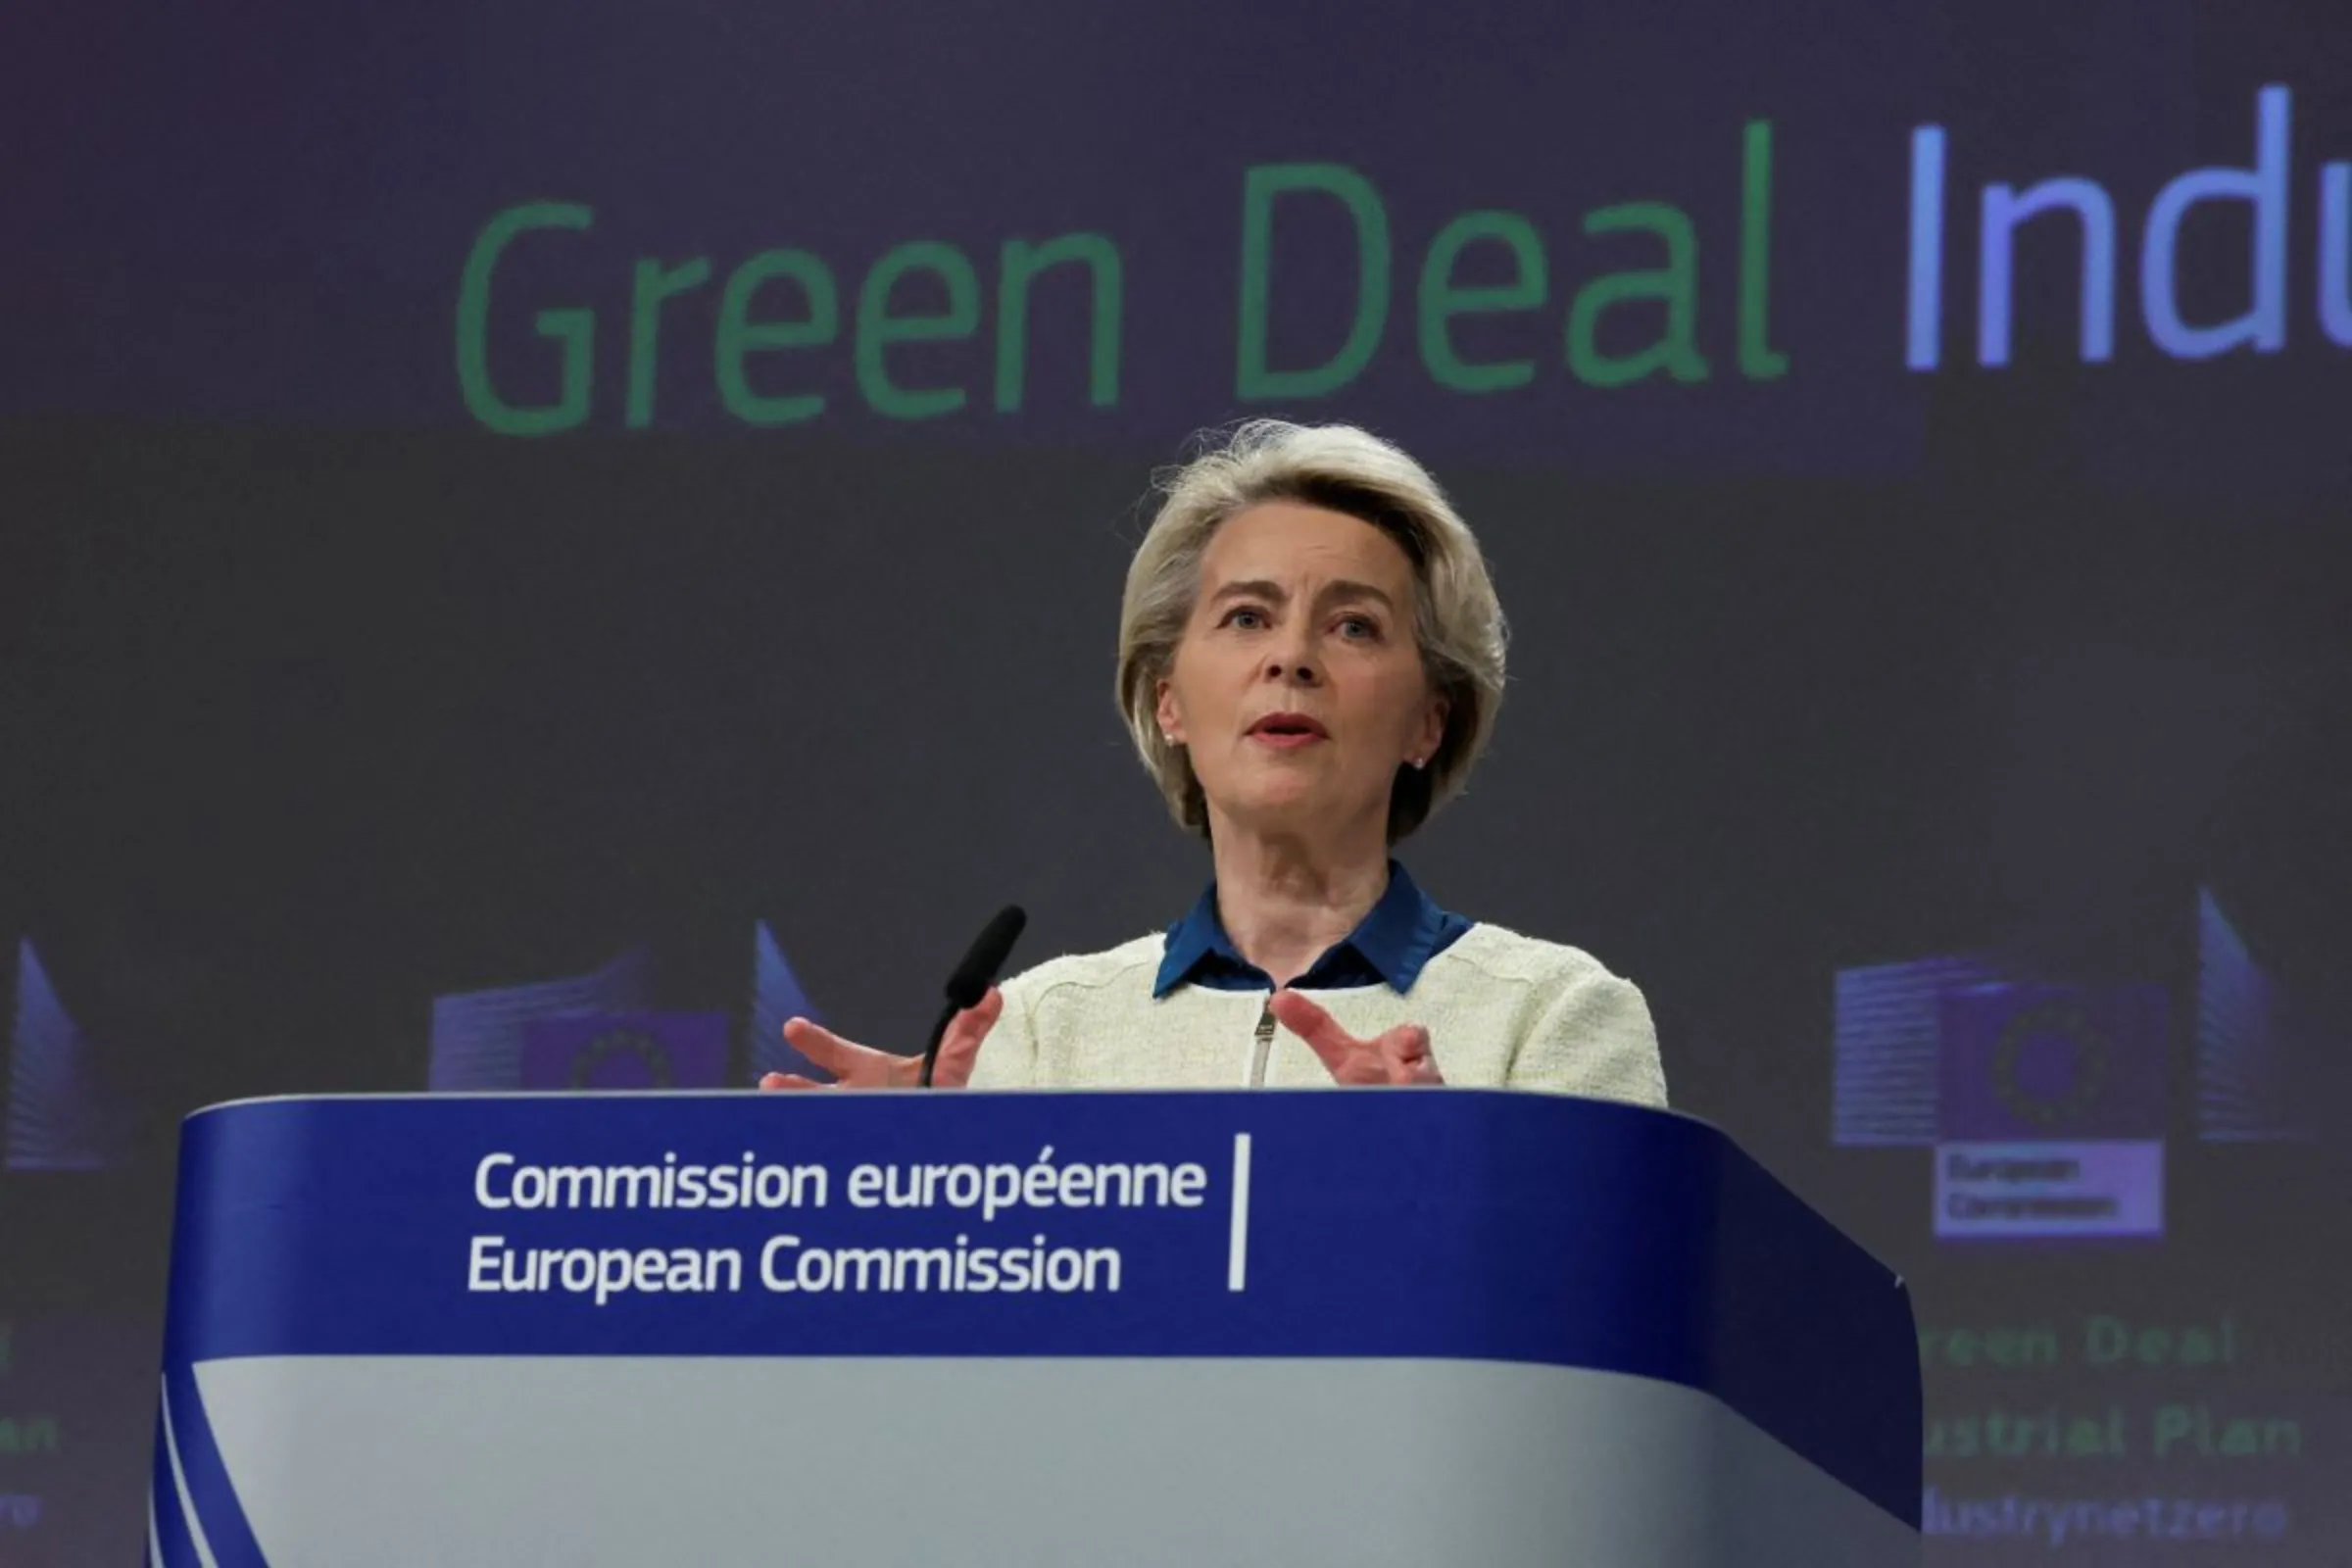 European Commission President Ursula von der Leyen presents a 'communication' detailing the EU's 'Green Deal Industrial Plan' to ensure the bloc plays a leading role in clean tech production, partly in EU's response to the U.S. Inflation Reduction Act, which will provide $369 billion of subsidies for electric vehicles and other green products, in Brussels, Belgium February 1, 2023